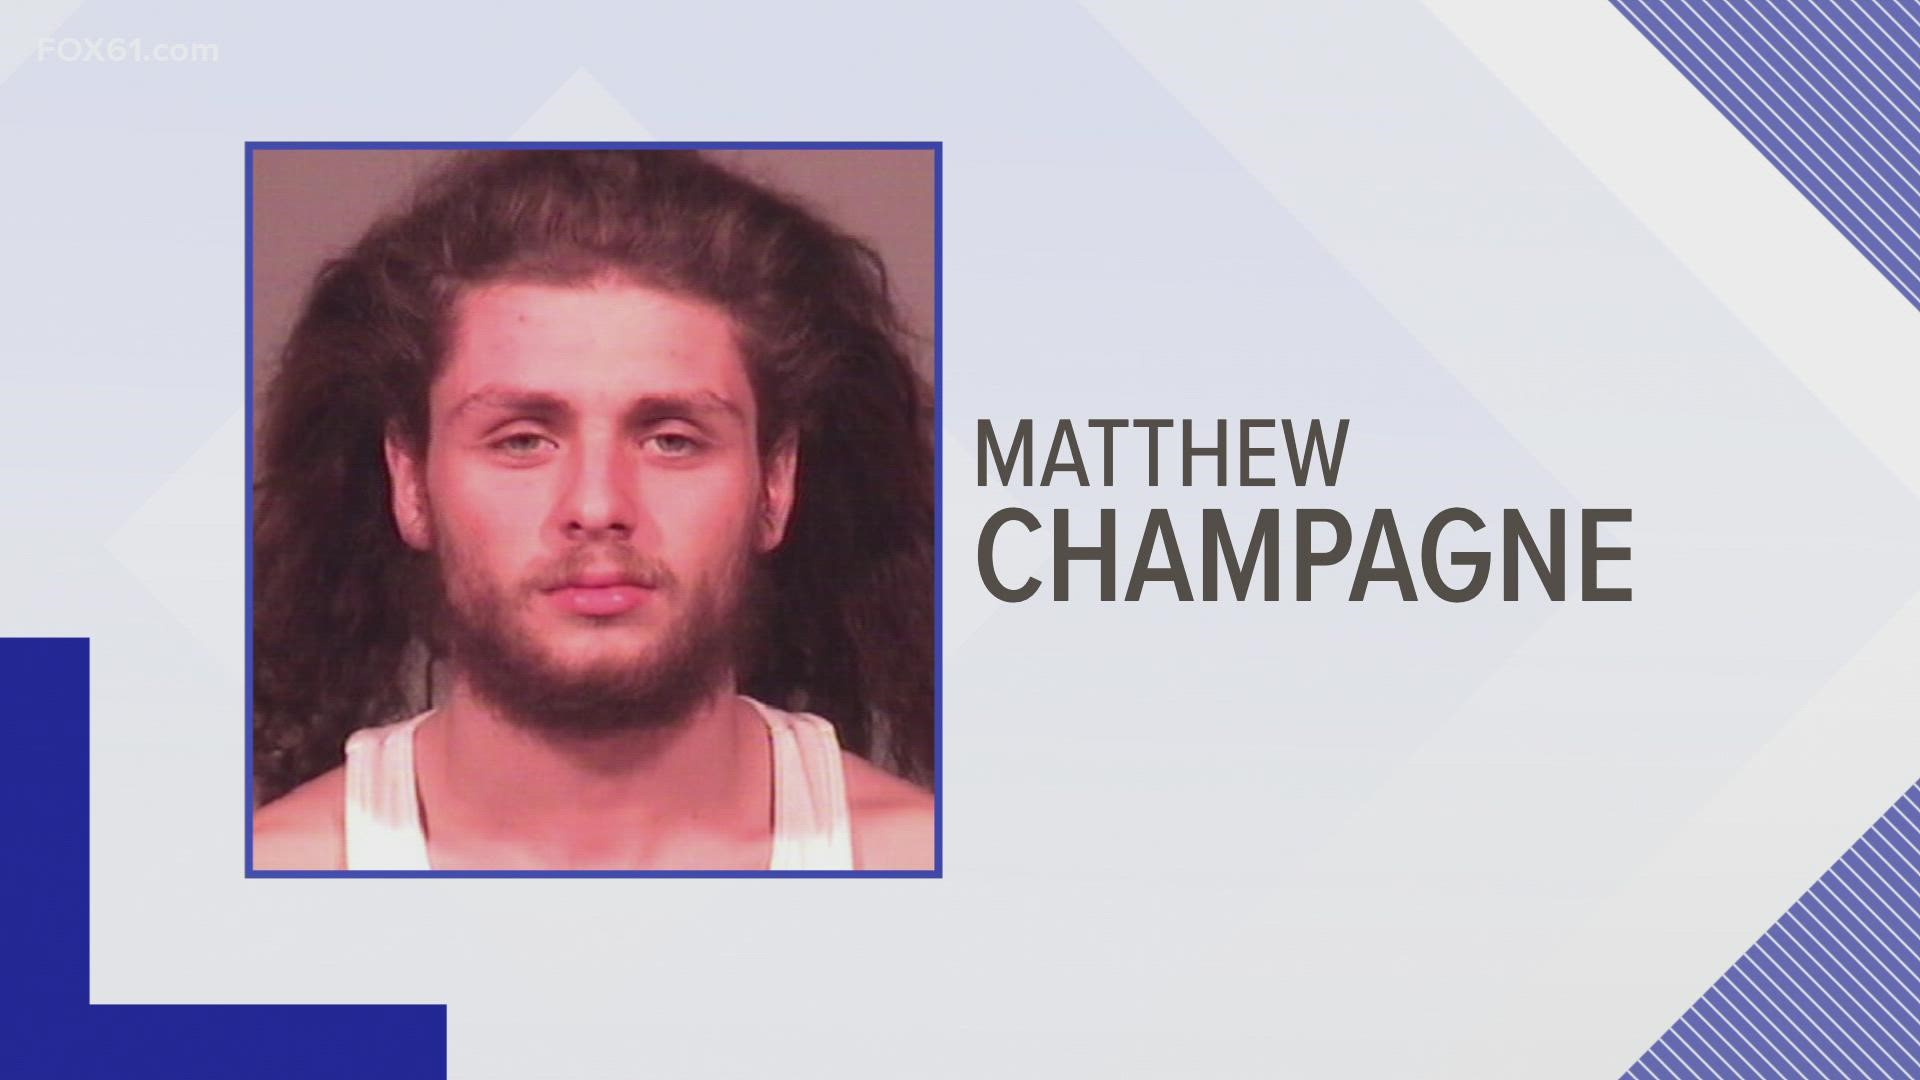 Man wanted for arrest in Vermont steals car in CT, starts chase ...